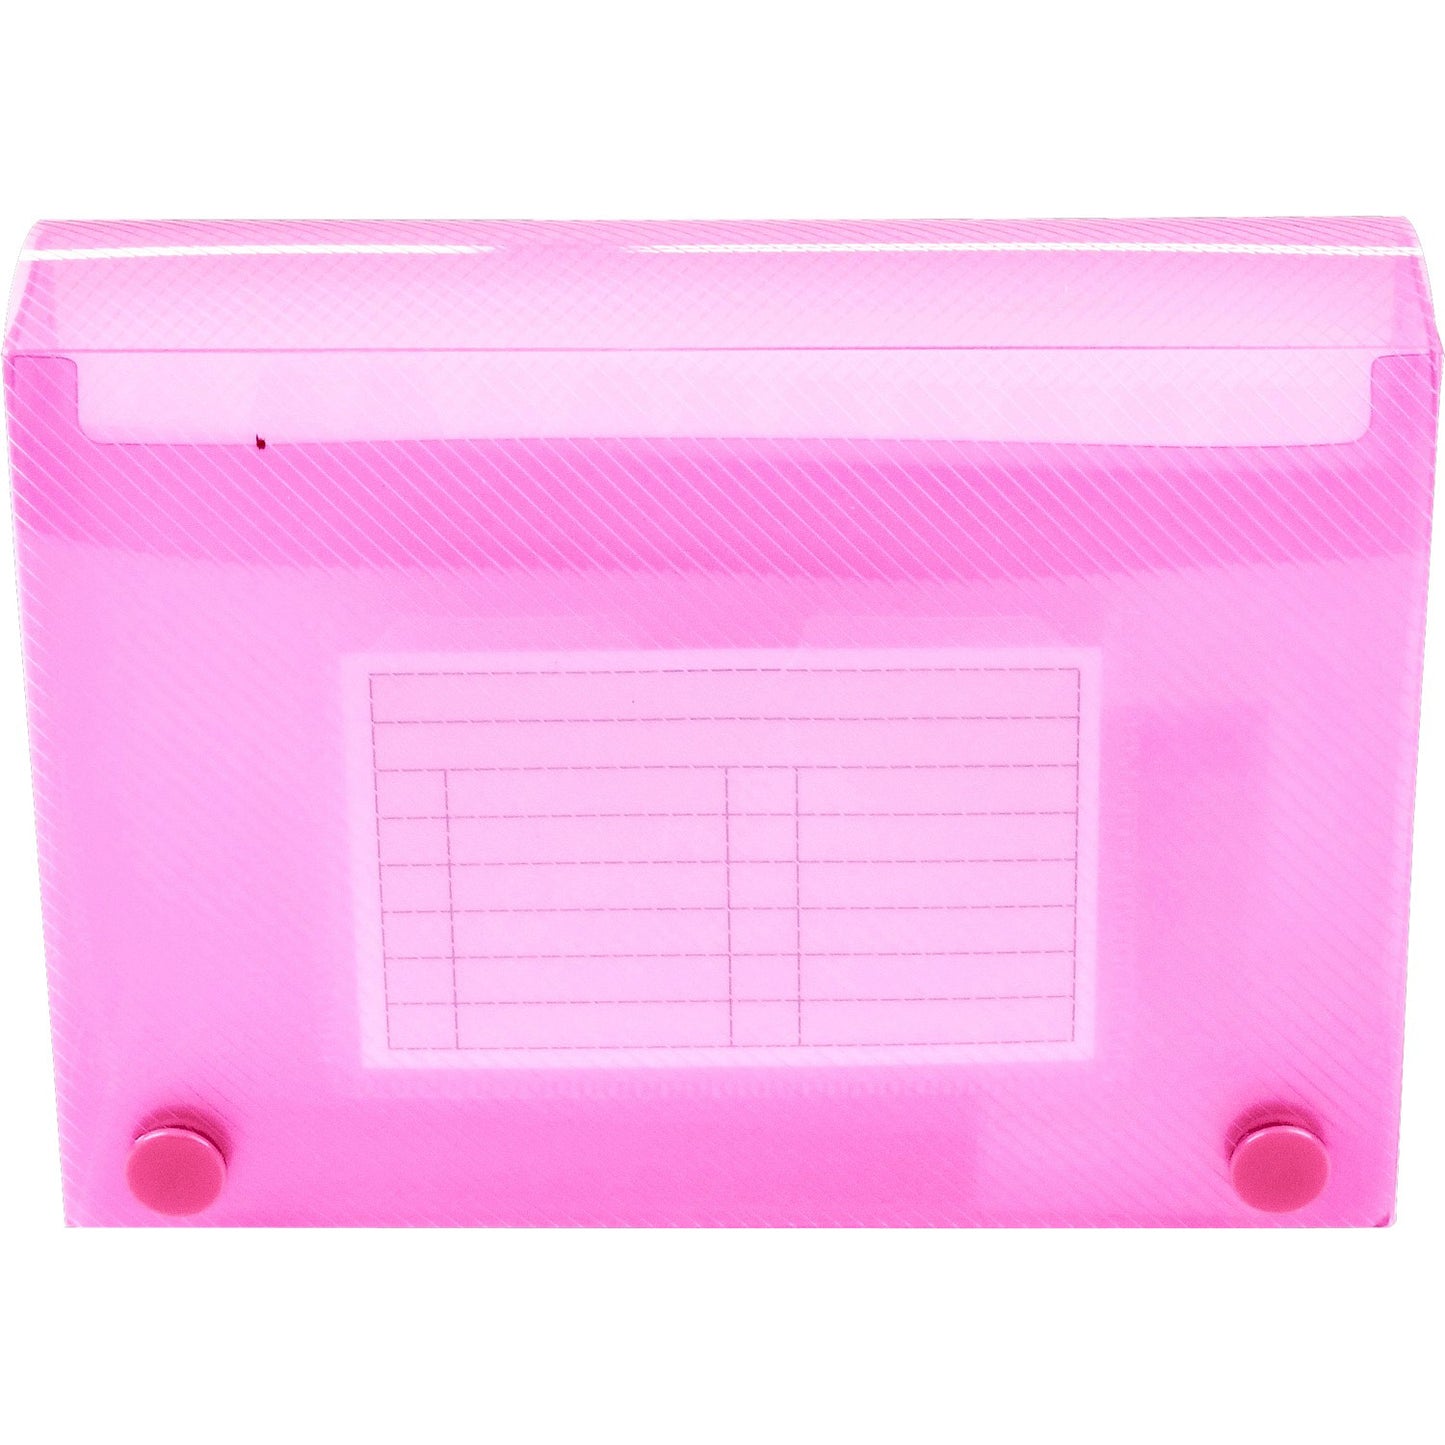 Index Card Holder 6x4 with Dividers - EL806